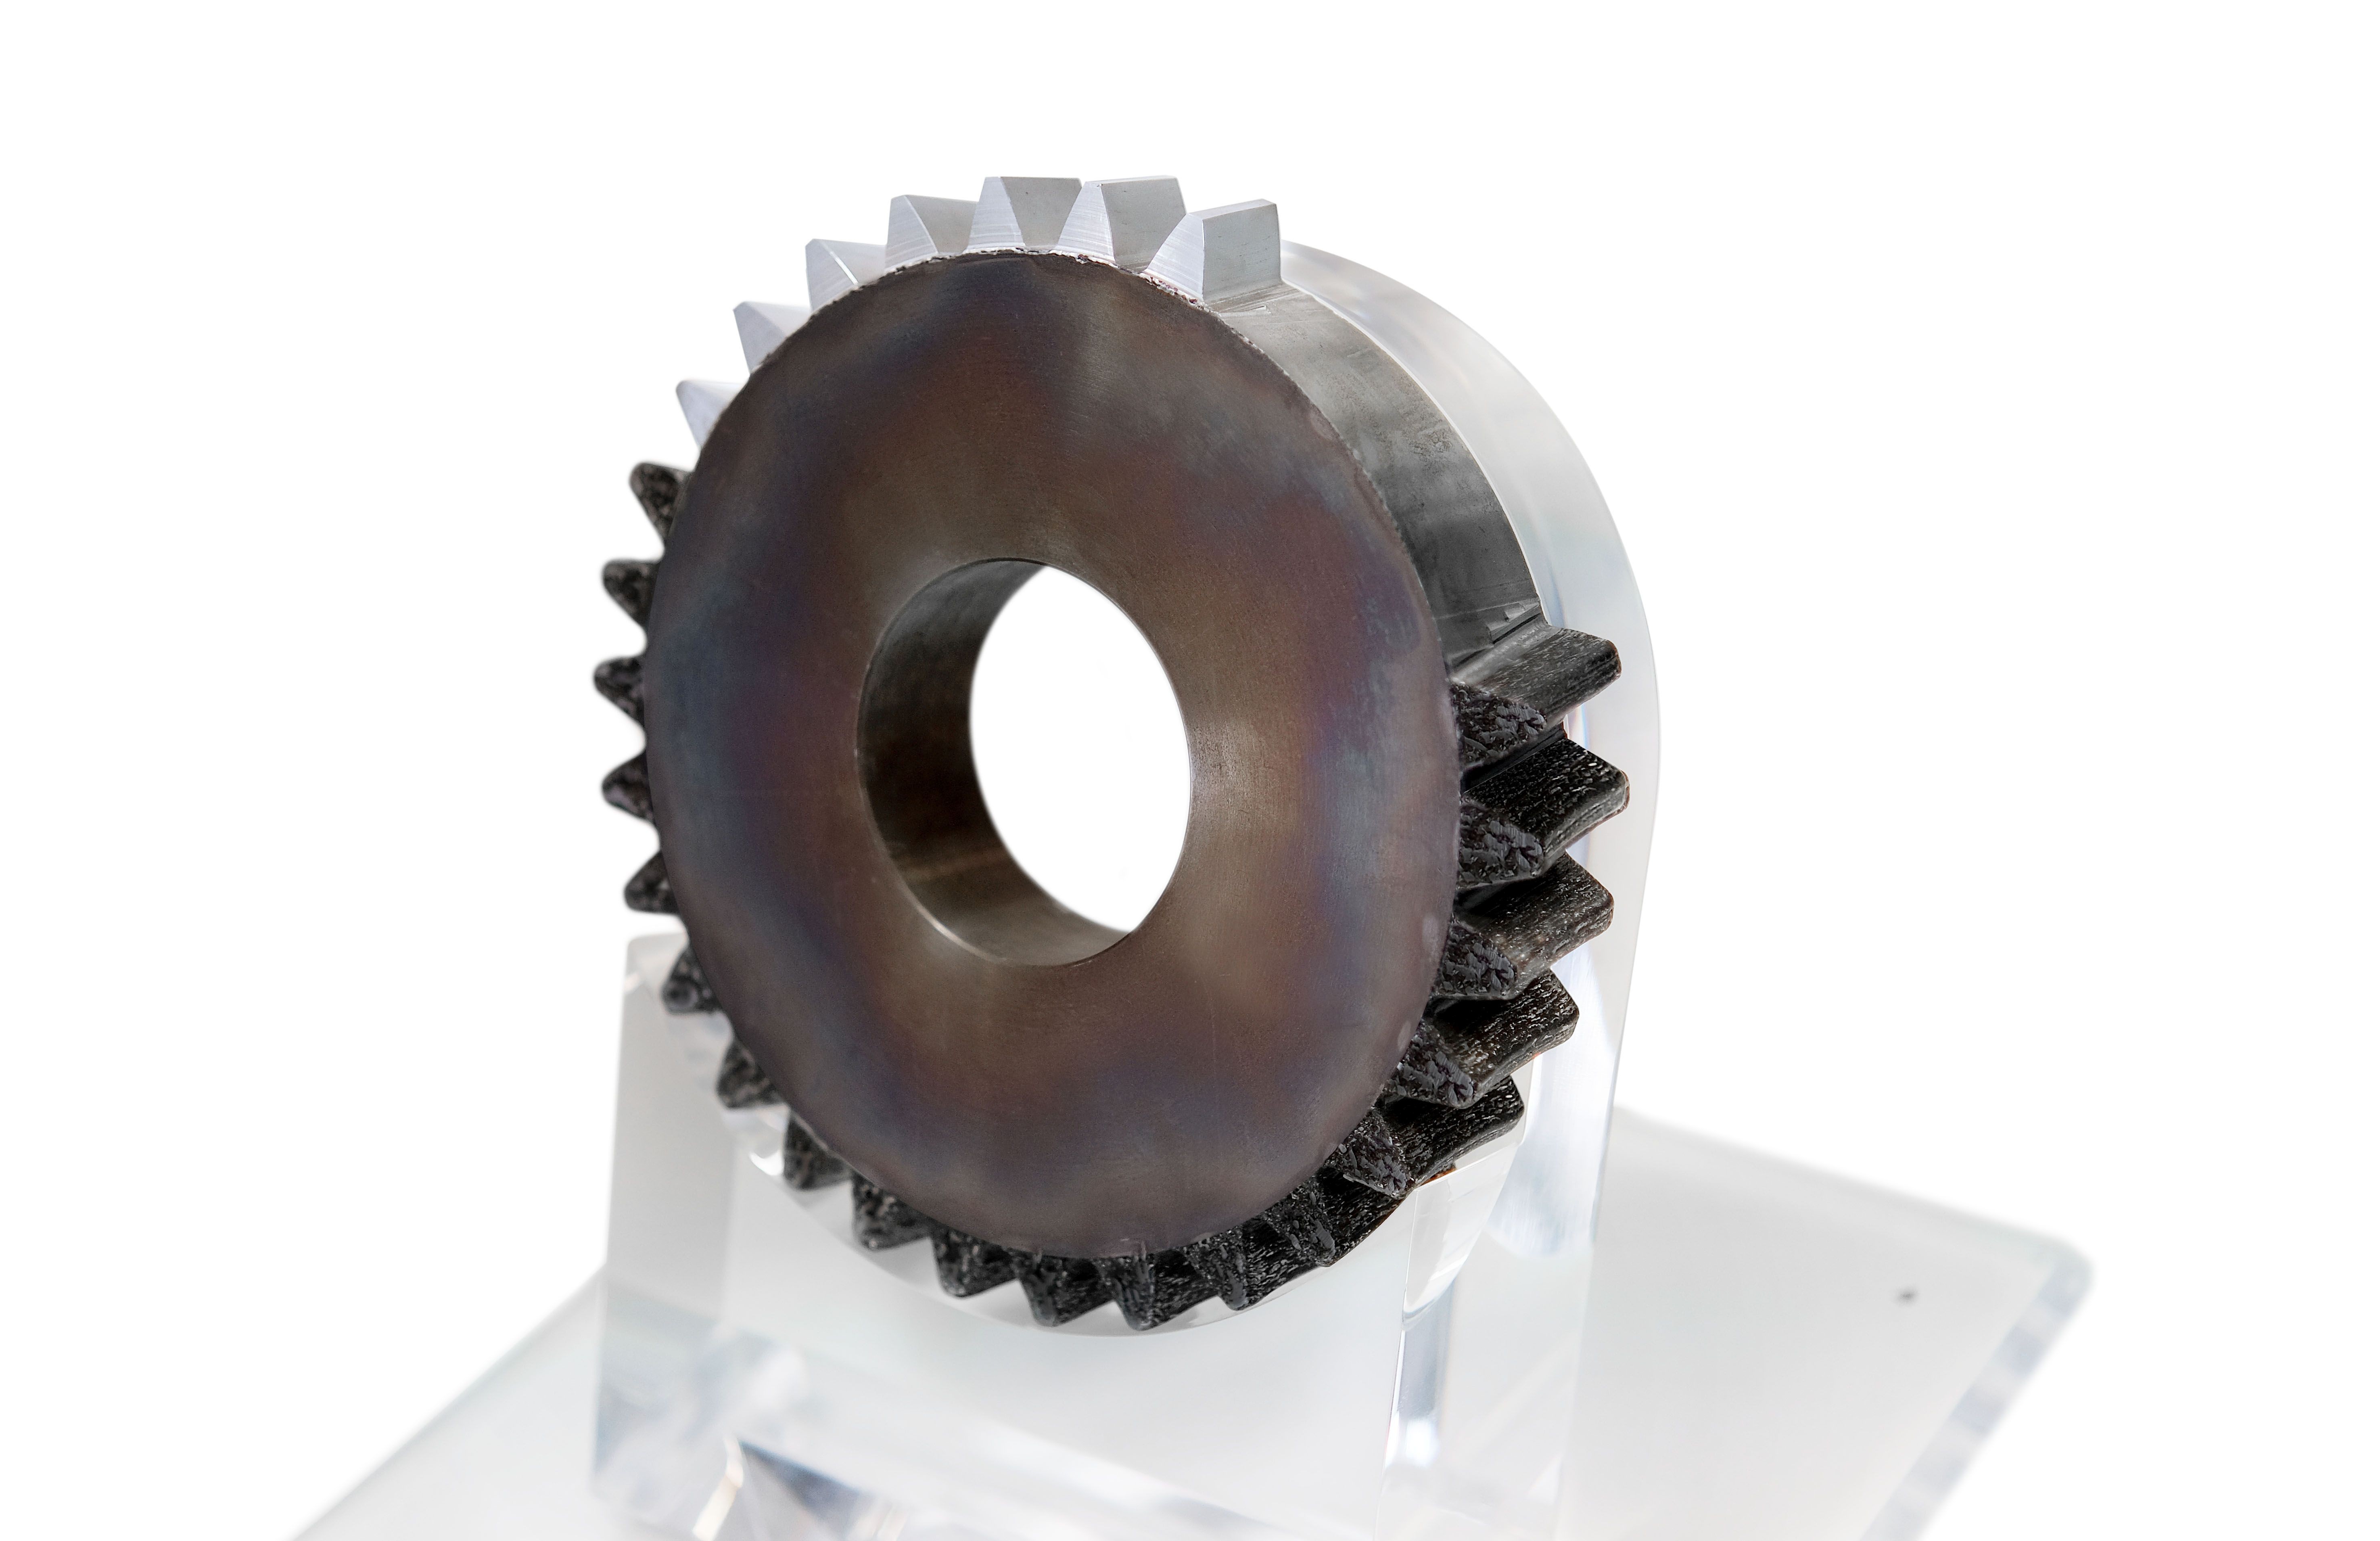 Gear wheel from the sustainability example with a row of new teeth – applied 